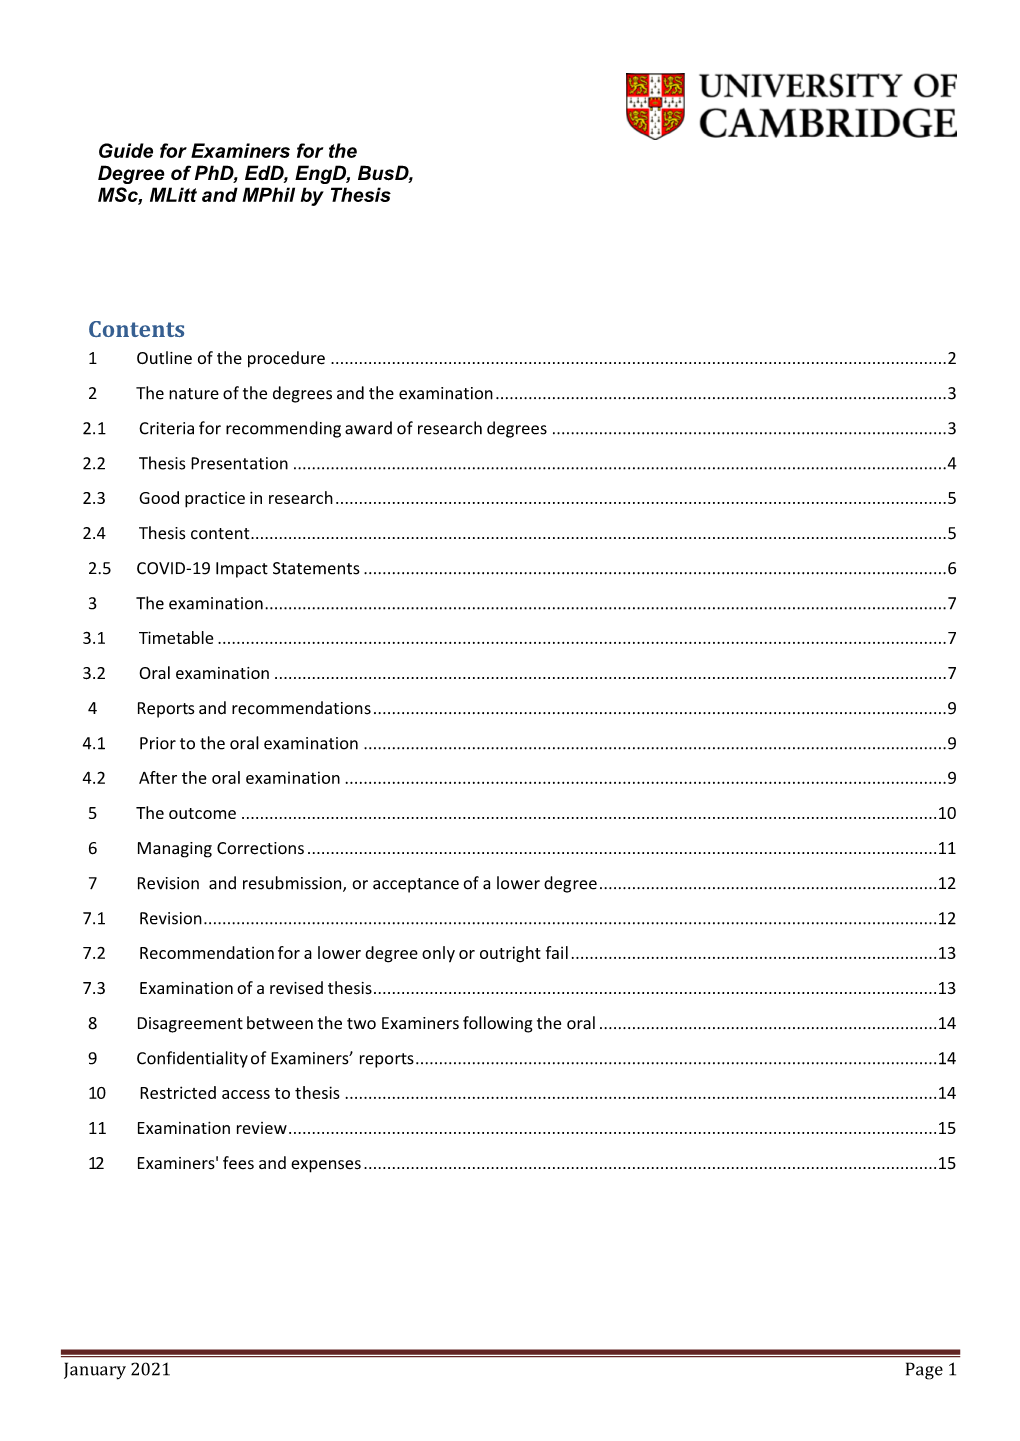 Guide for Examiners for the Degree of Phd, Edd, Engd, Busd, Msc, Mlitt and Mphil by Thesis